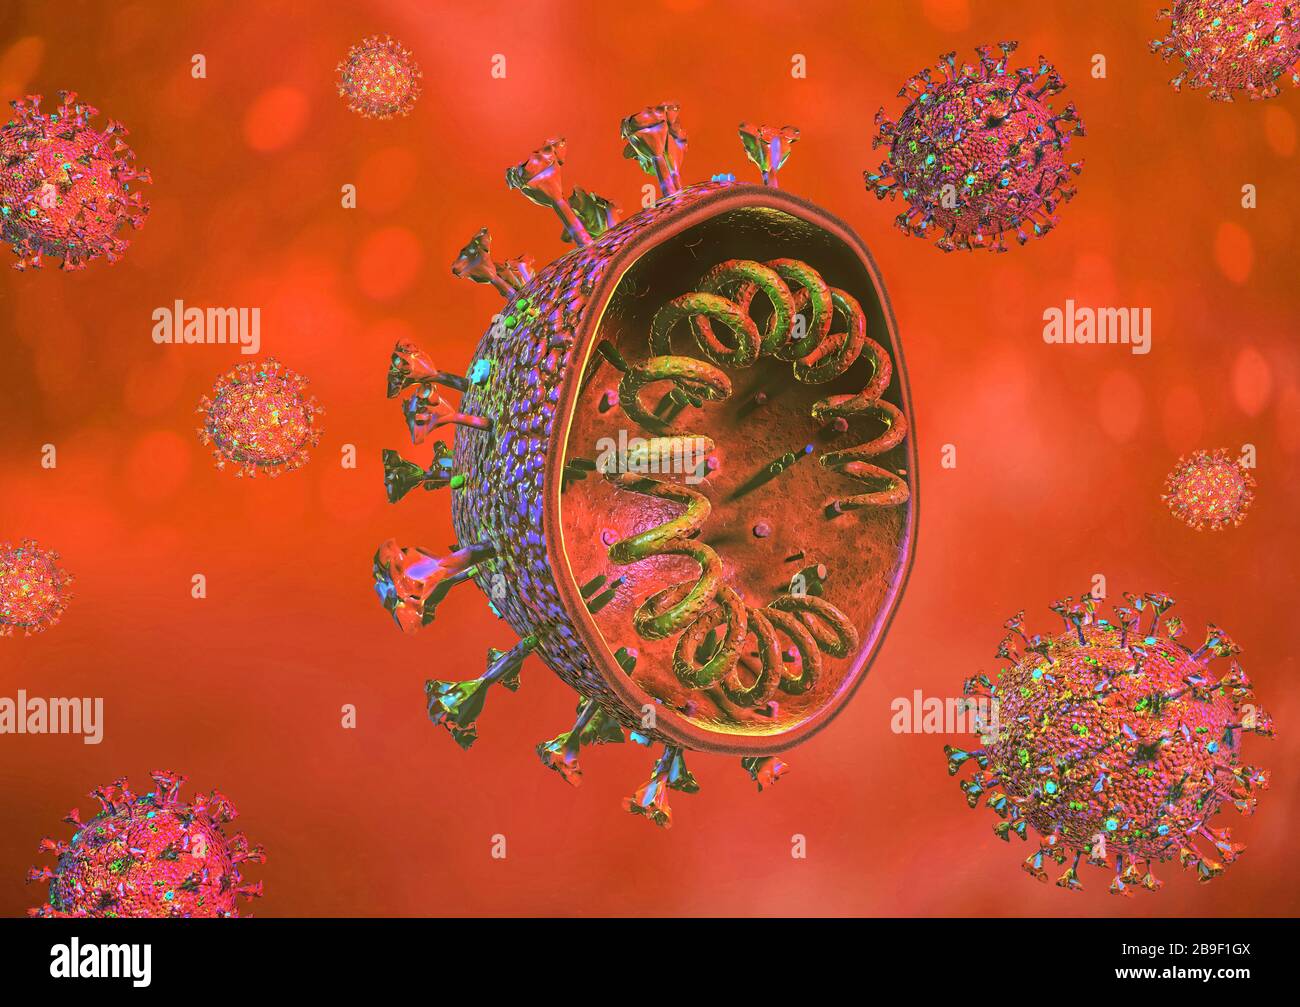 Cross section of the COVID-19 coronavirus on a colored background. Stock Photo